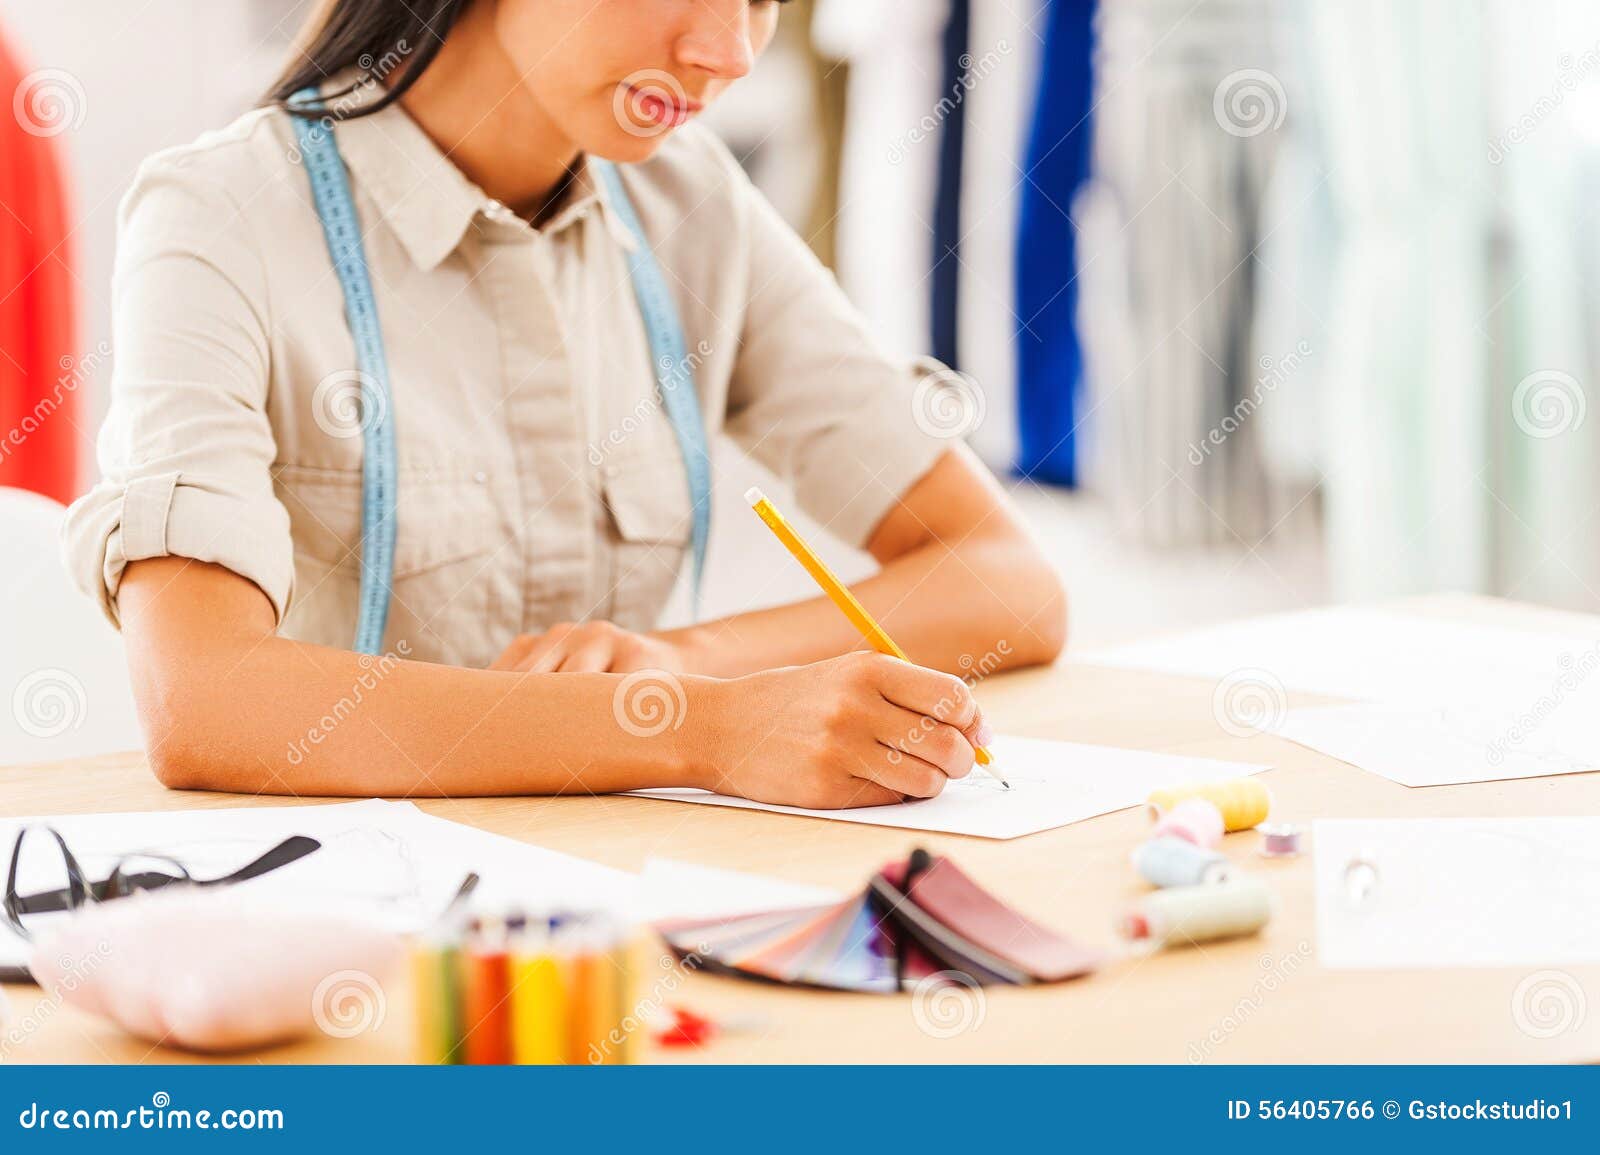 Creating masterpiece. stock photo. Image of business - 56405766